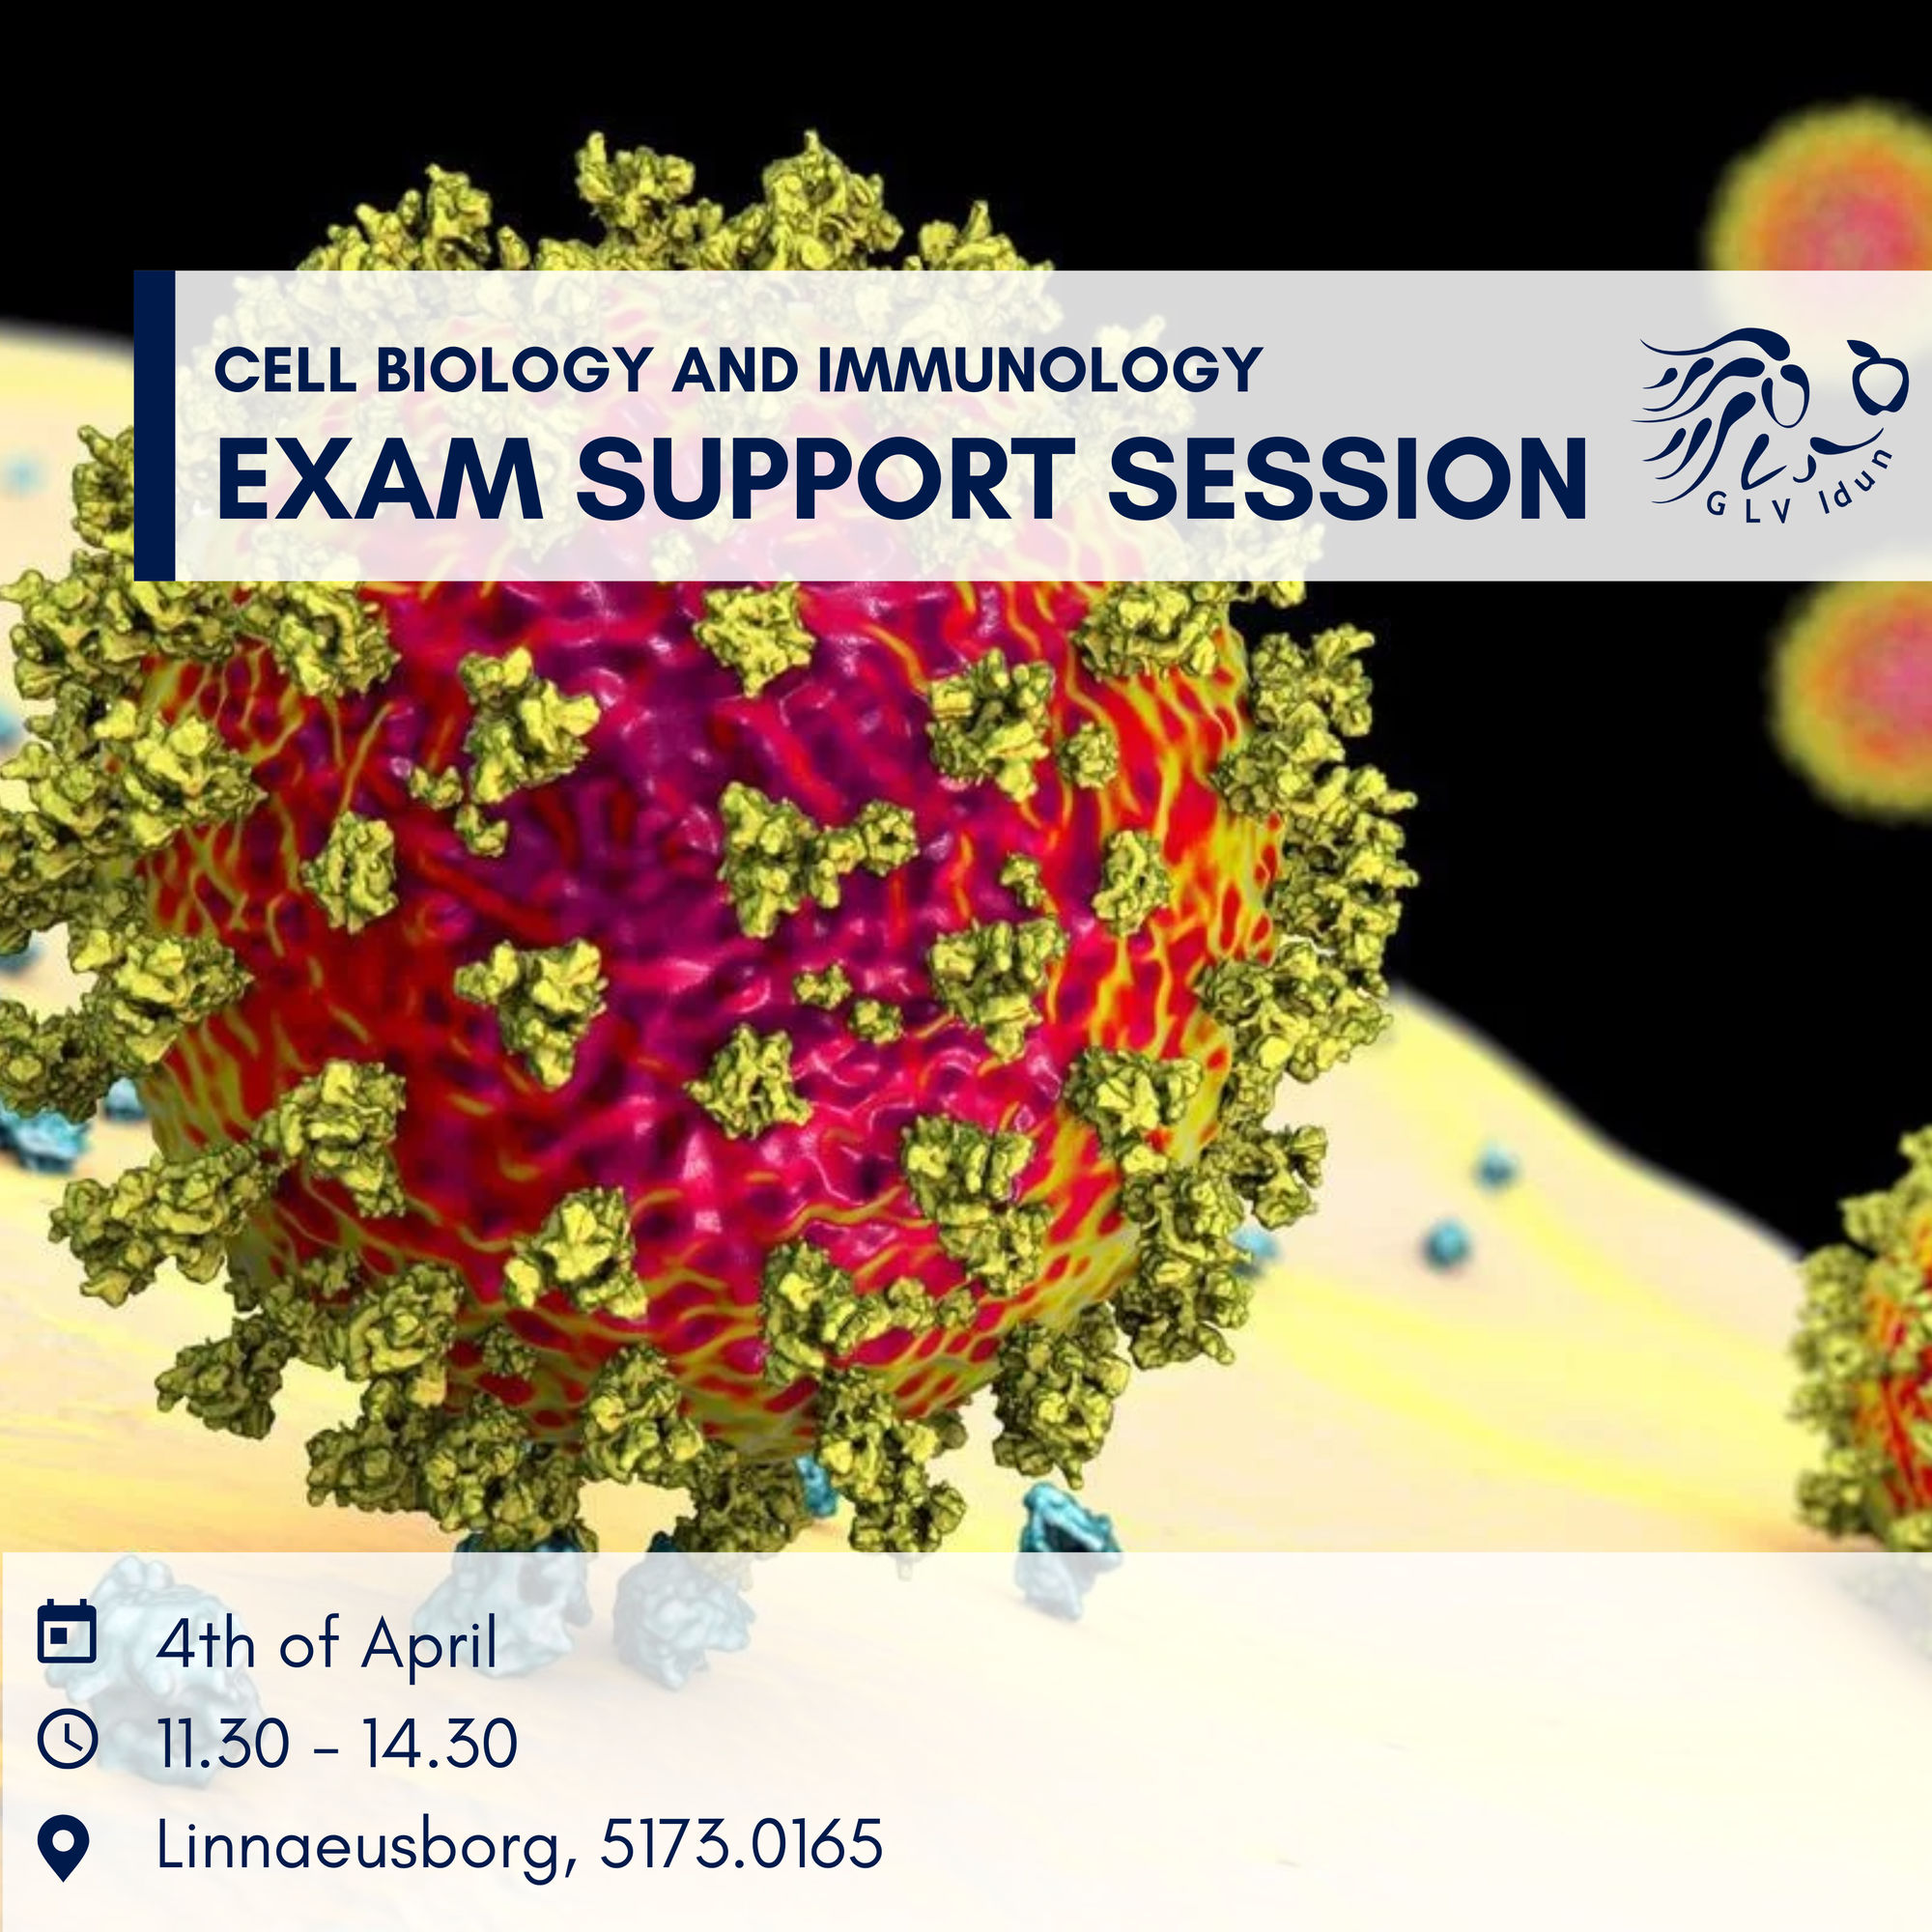 Exam Support Session: Cell Biology and Immunology